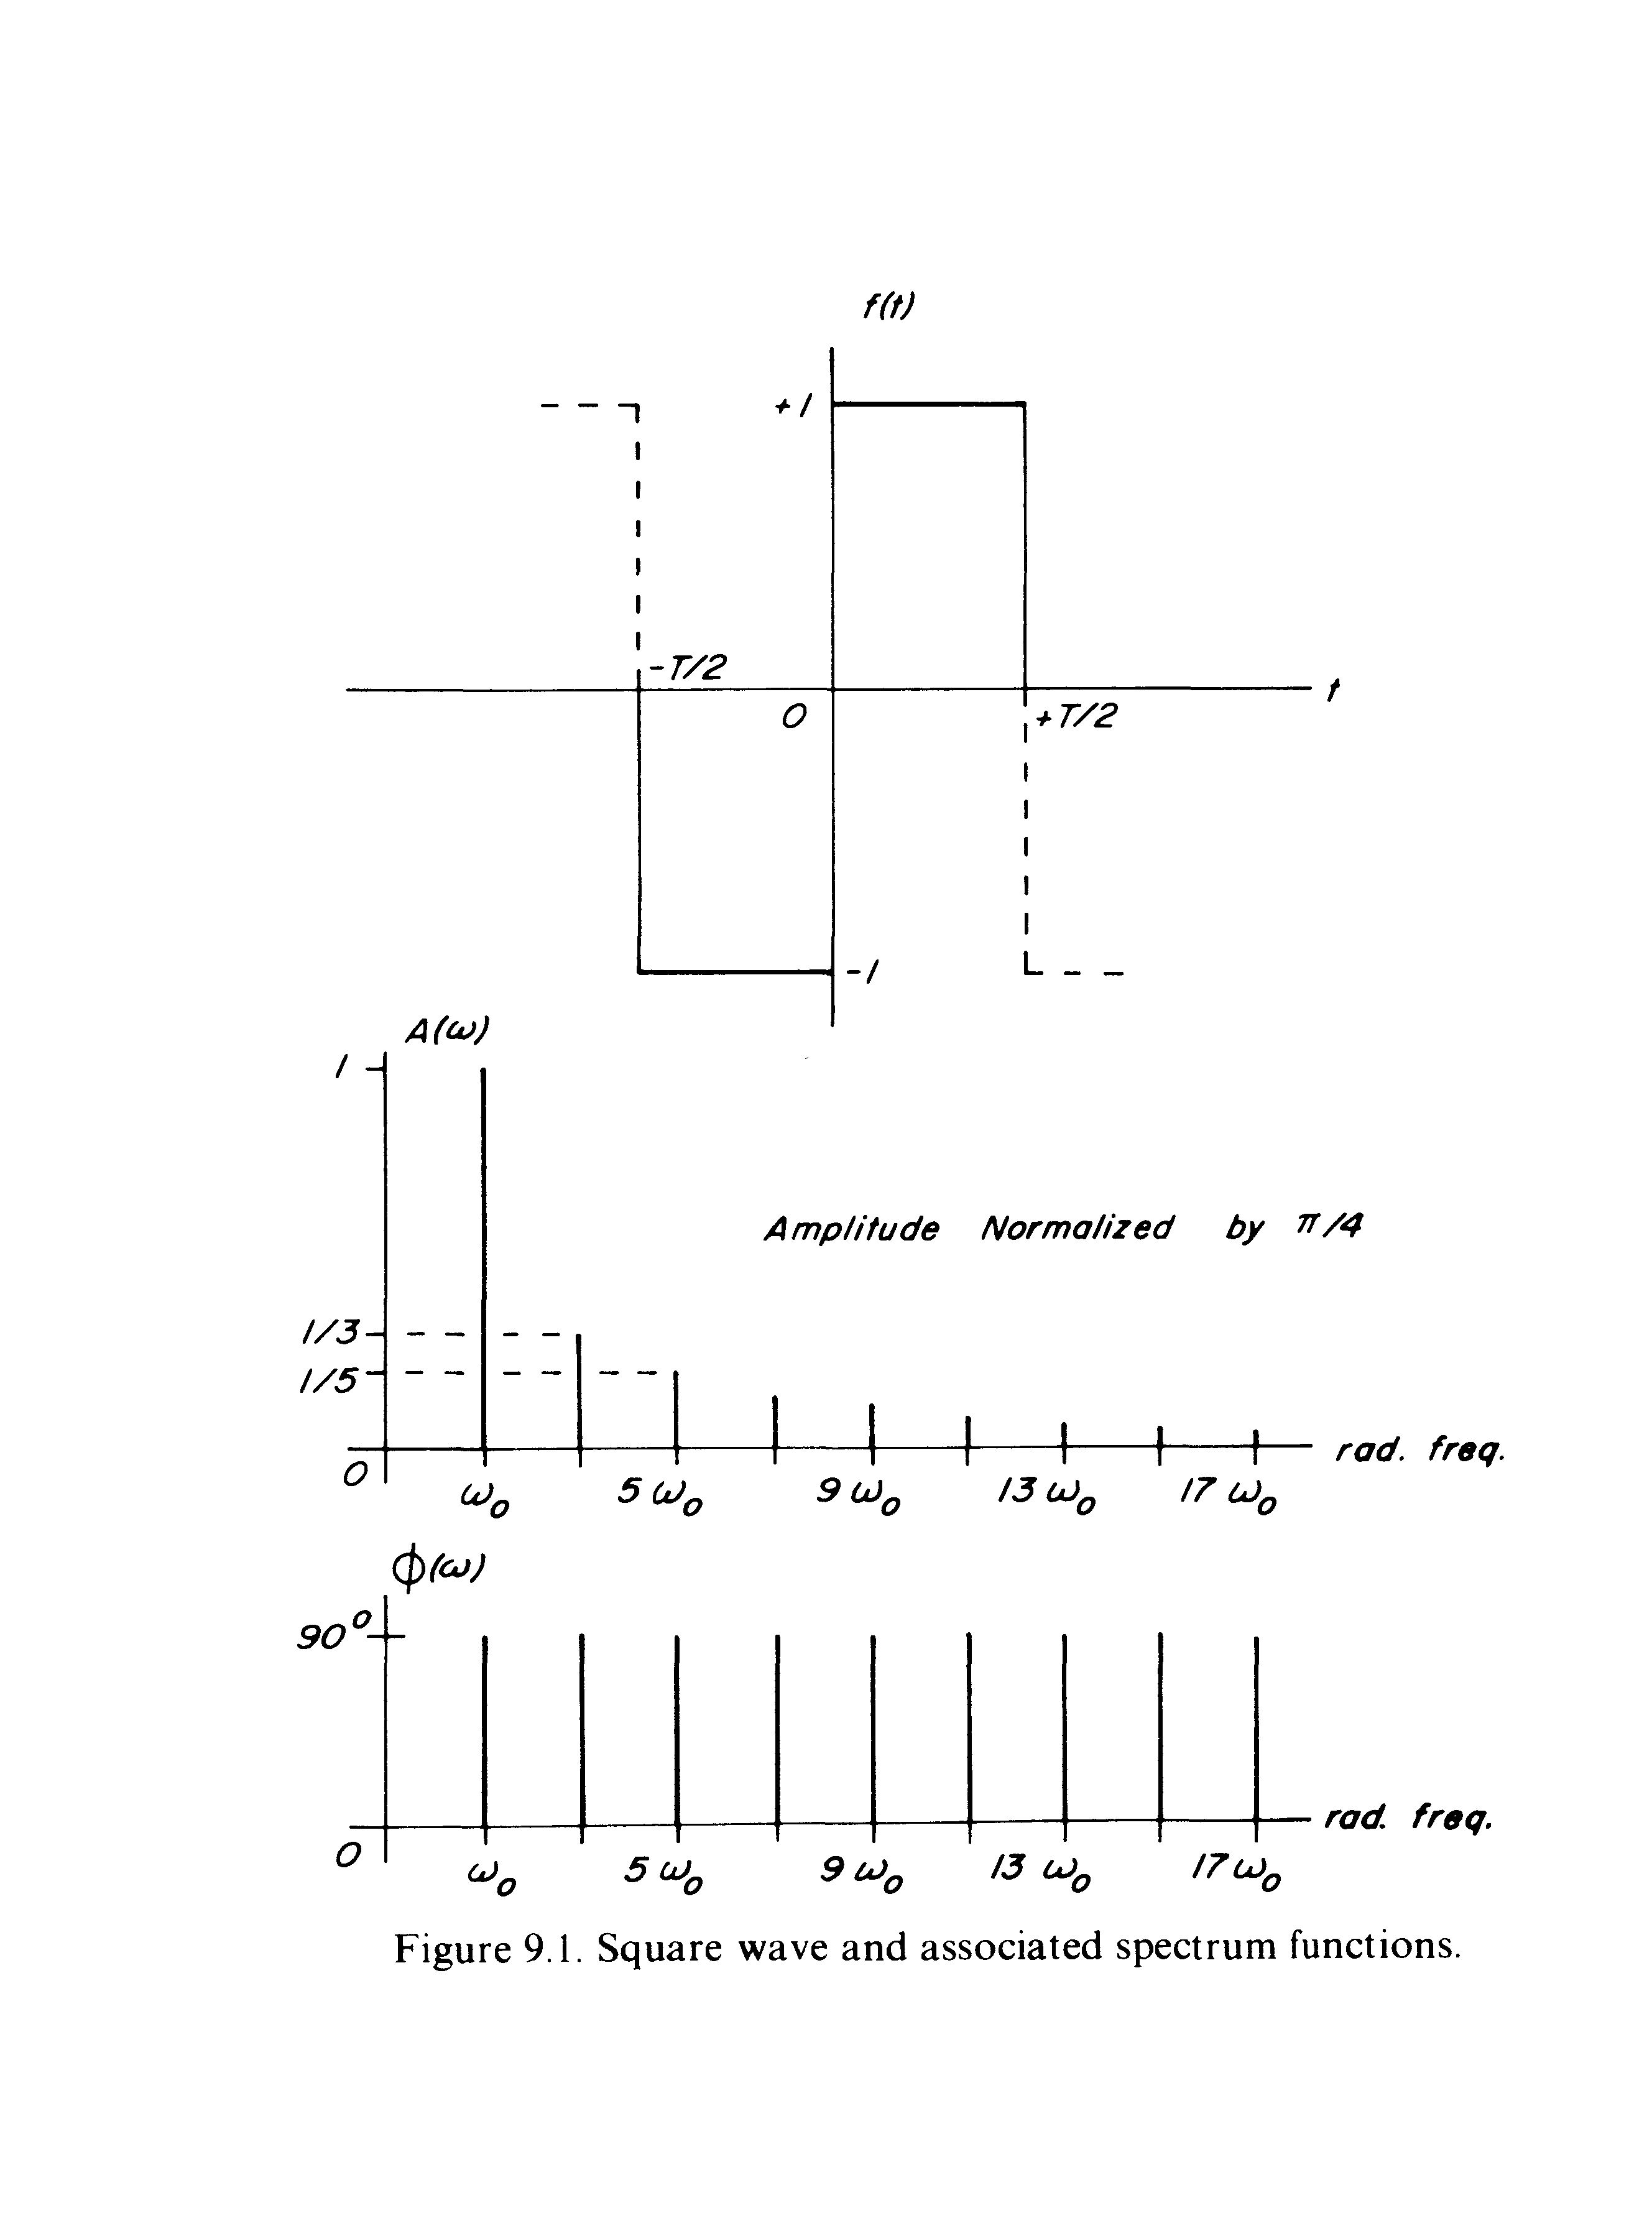 Figure 9.1. Square wave and associated spectrum functions.